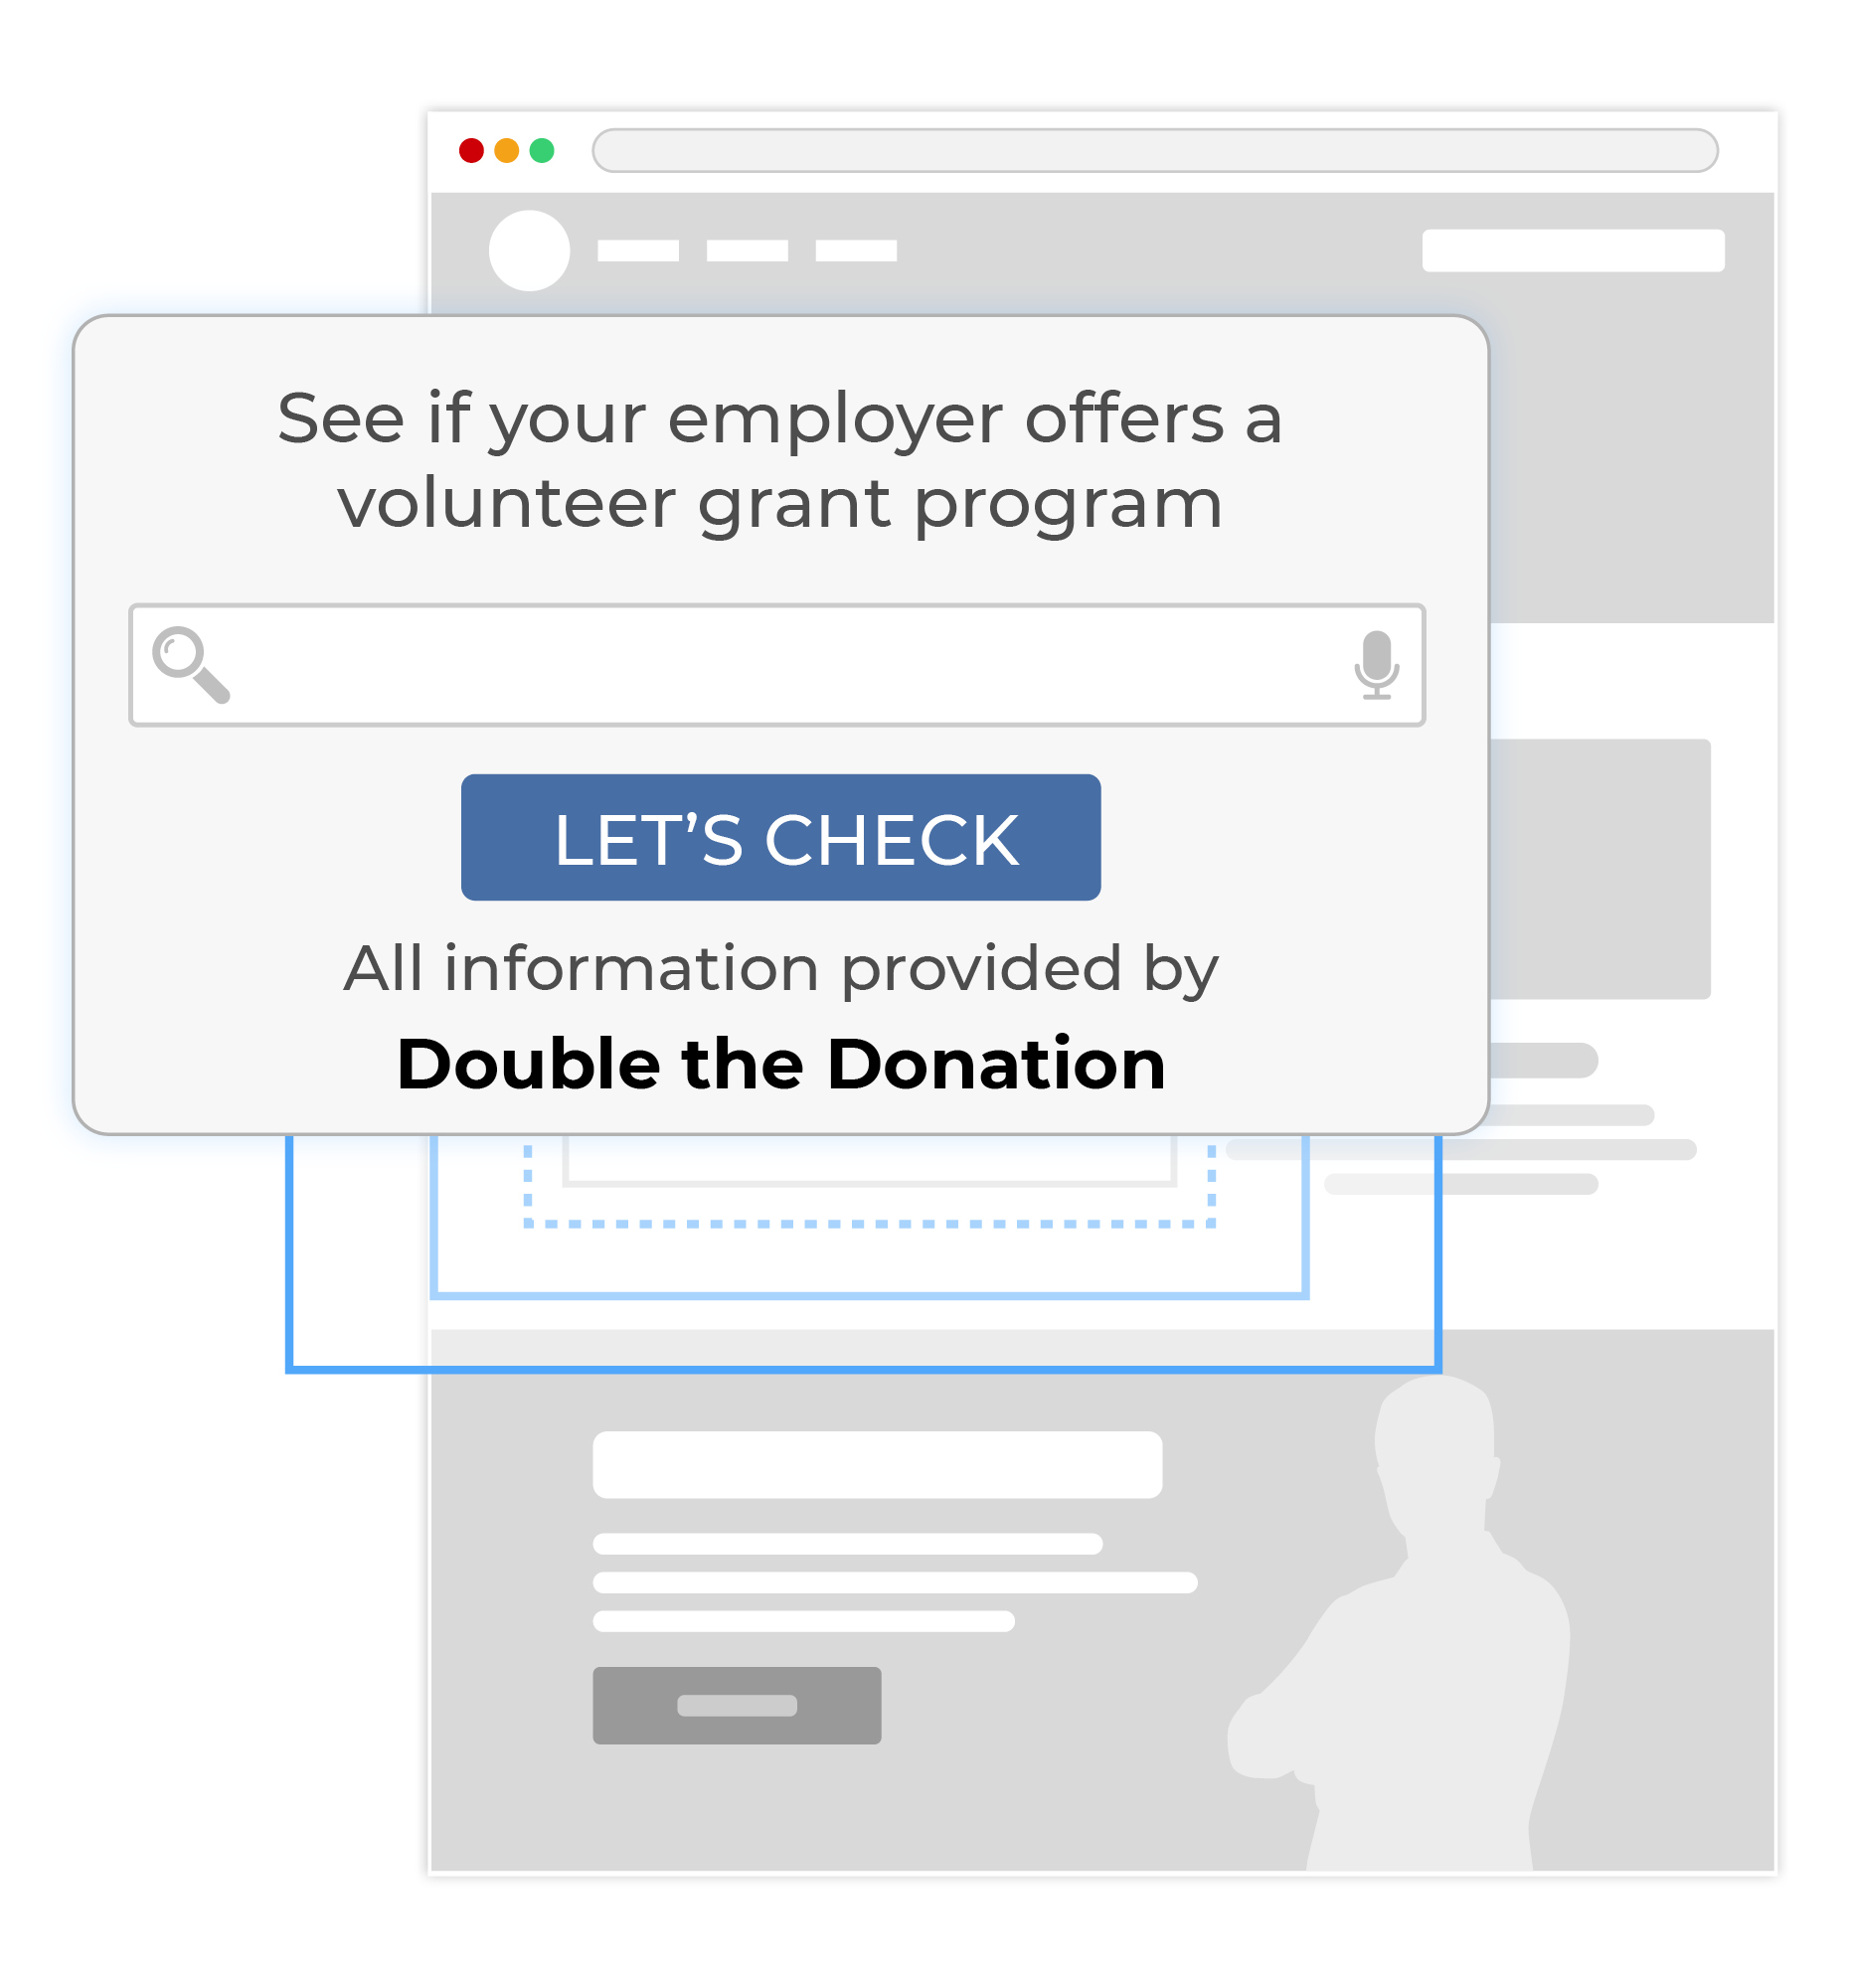 Double the Donation's volunteer grant software